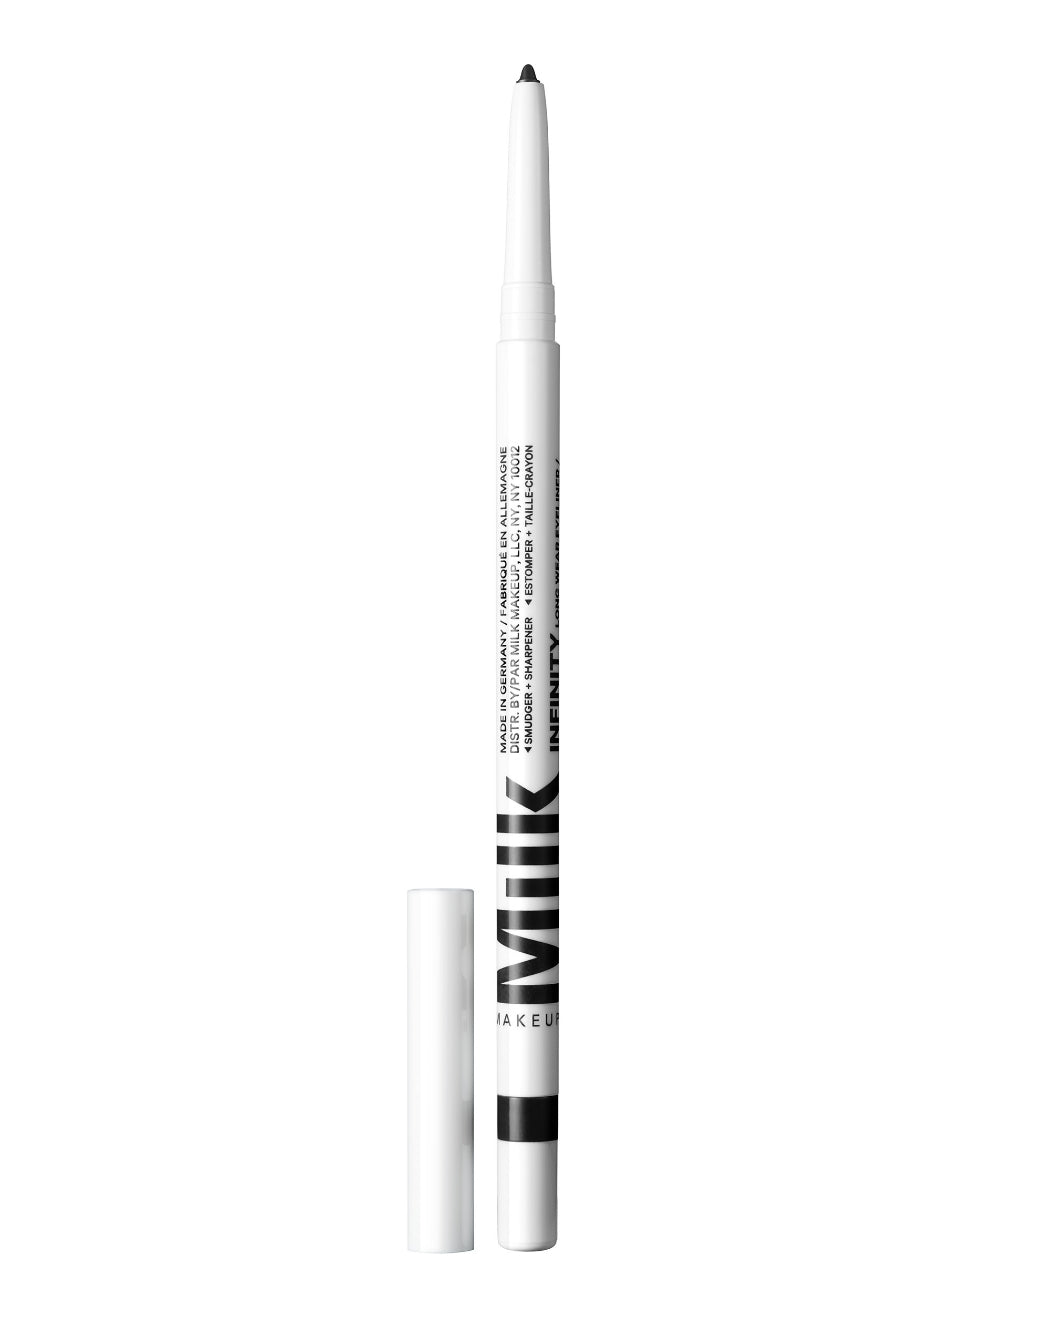 Product image of Milk Makeup Infinity Long Wear Eyeliner in Outerspace, a black shade